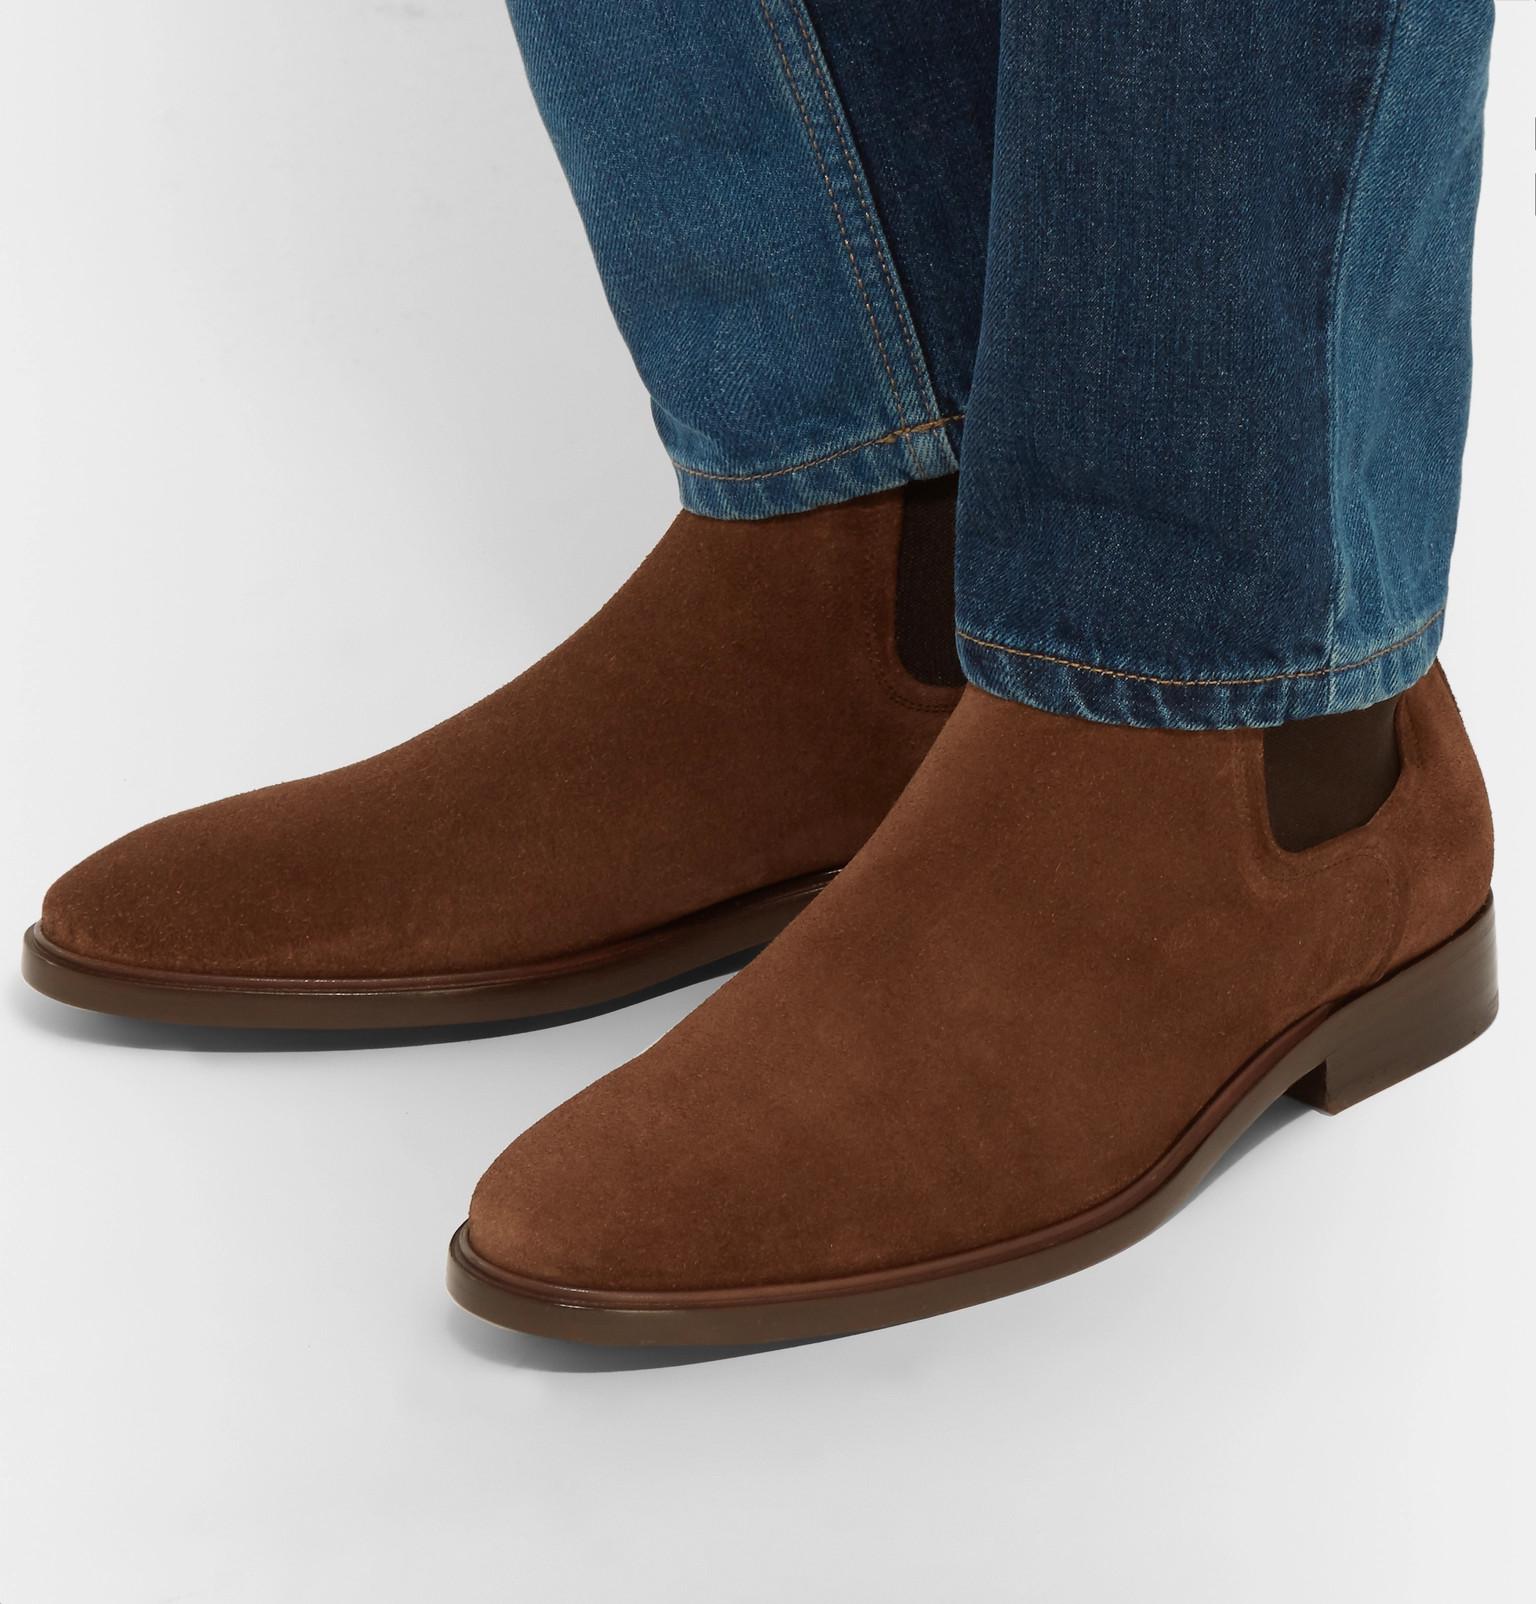 Lanvin Suede Chelsea Boots in Tan (Brown) for Men - Lyst